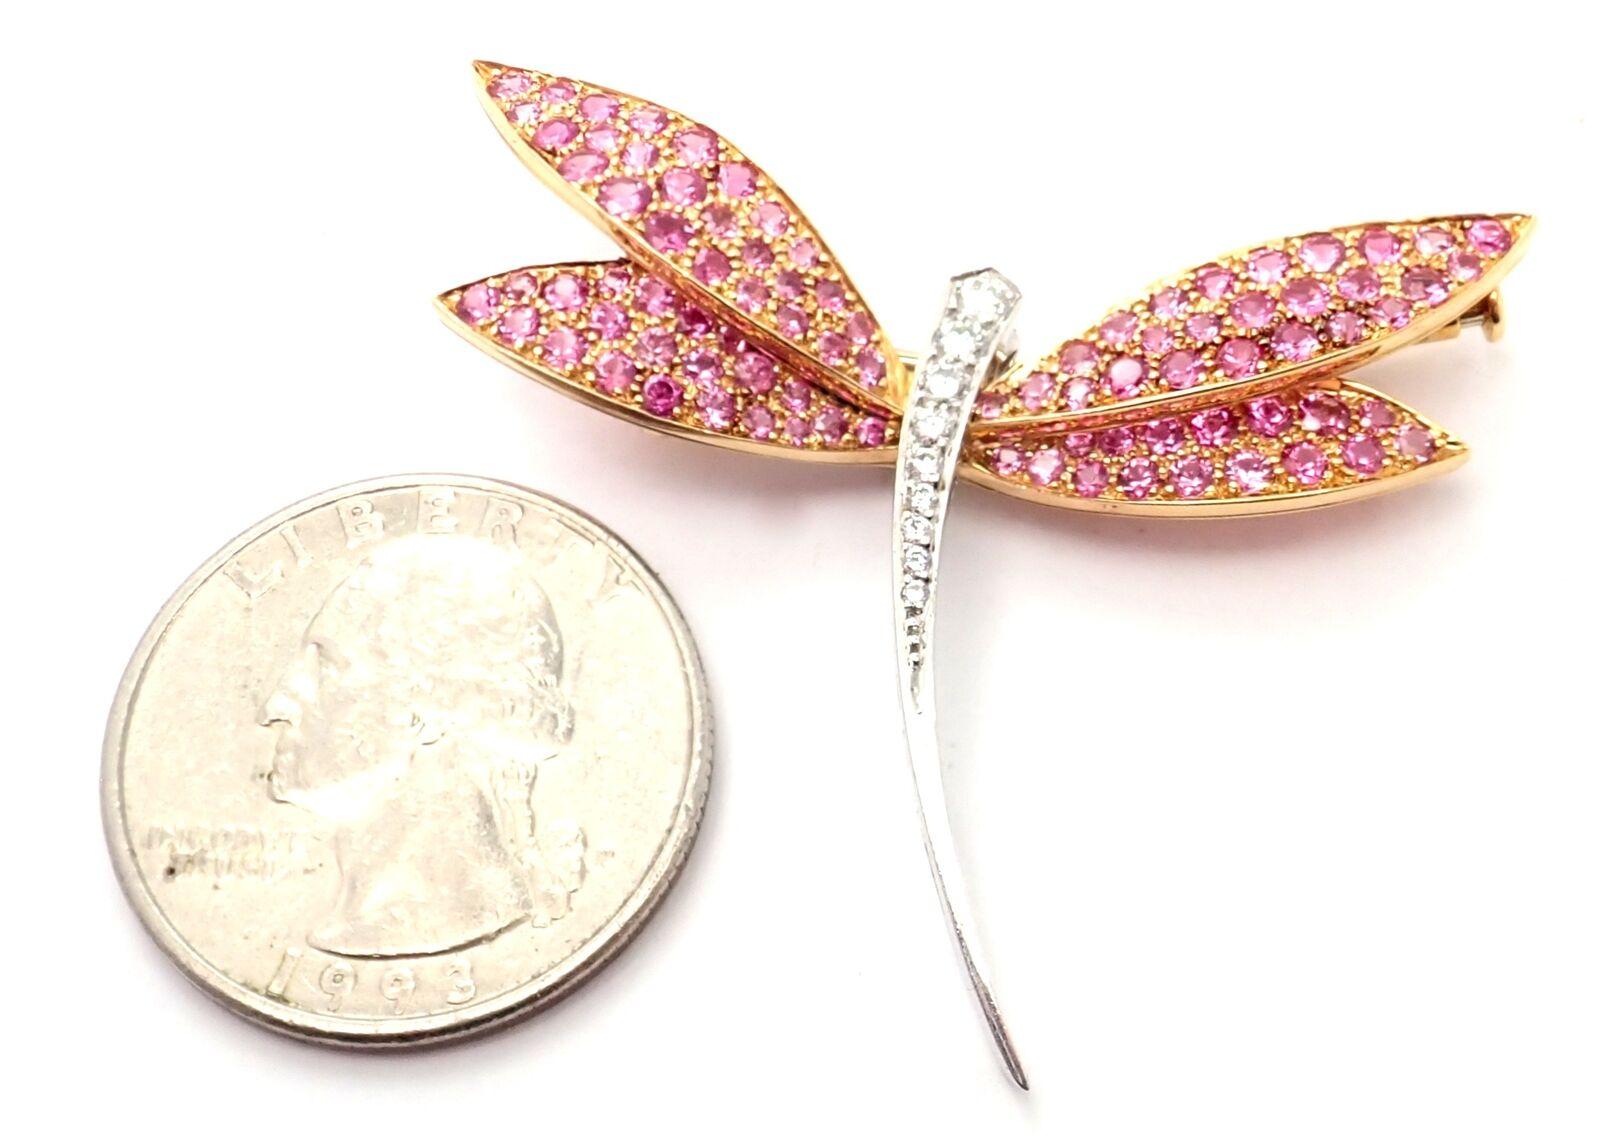 Van Cleef & Arpels Dragonfly Diamond Pink Sapphire White Gold Pin Brooch 1